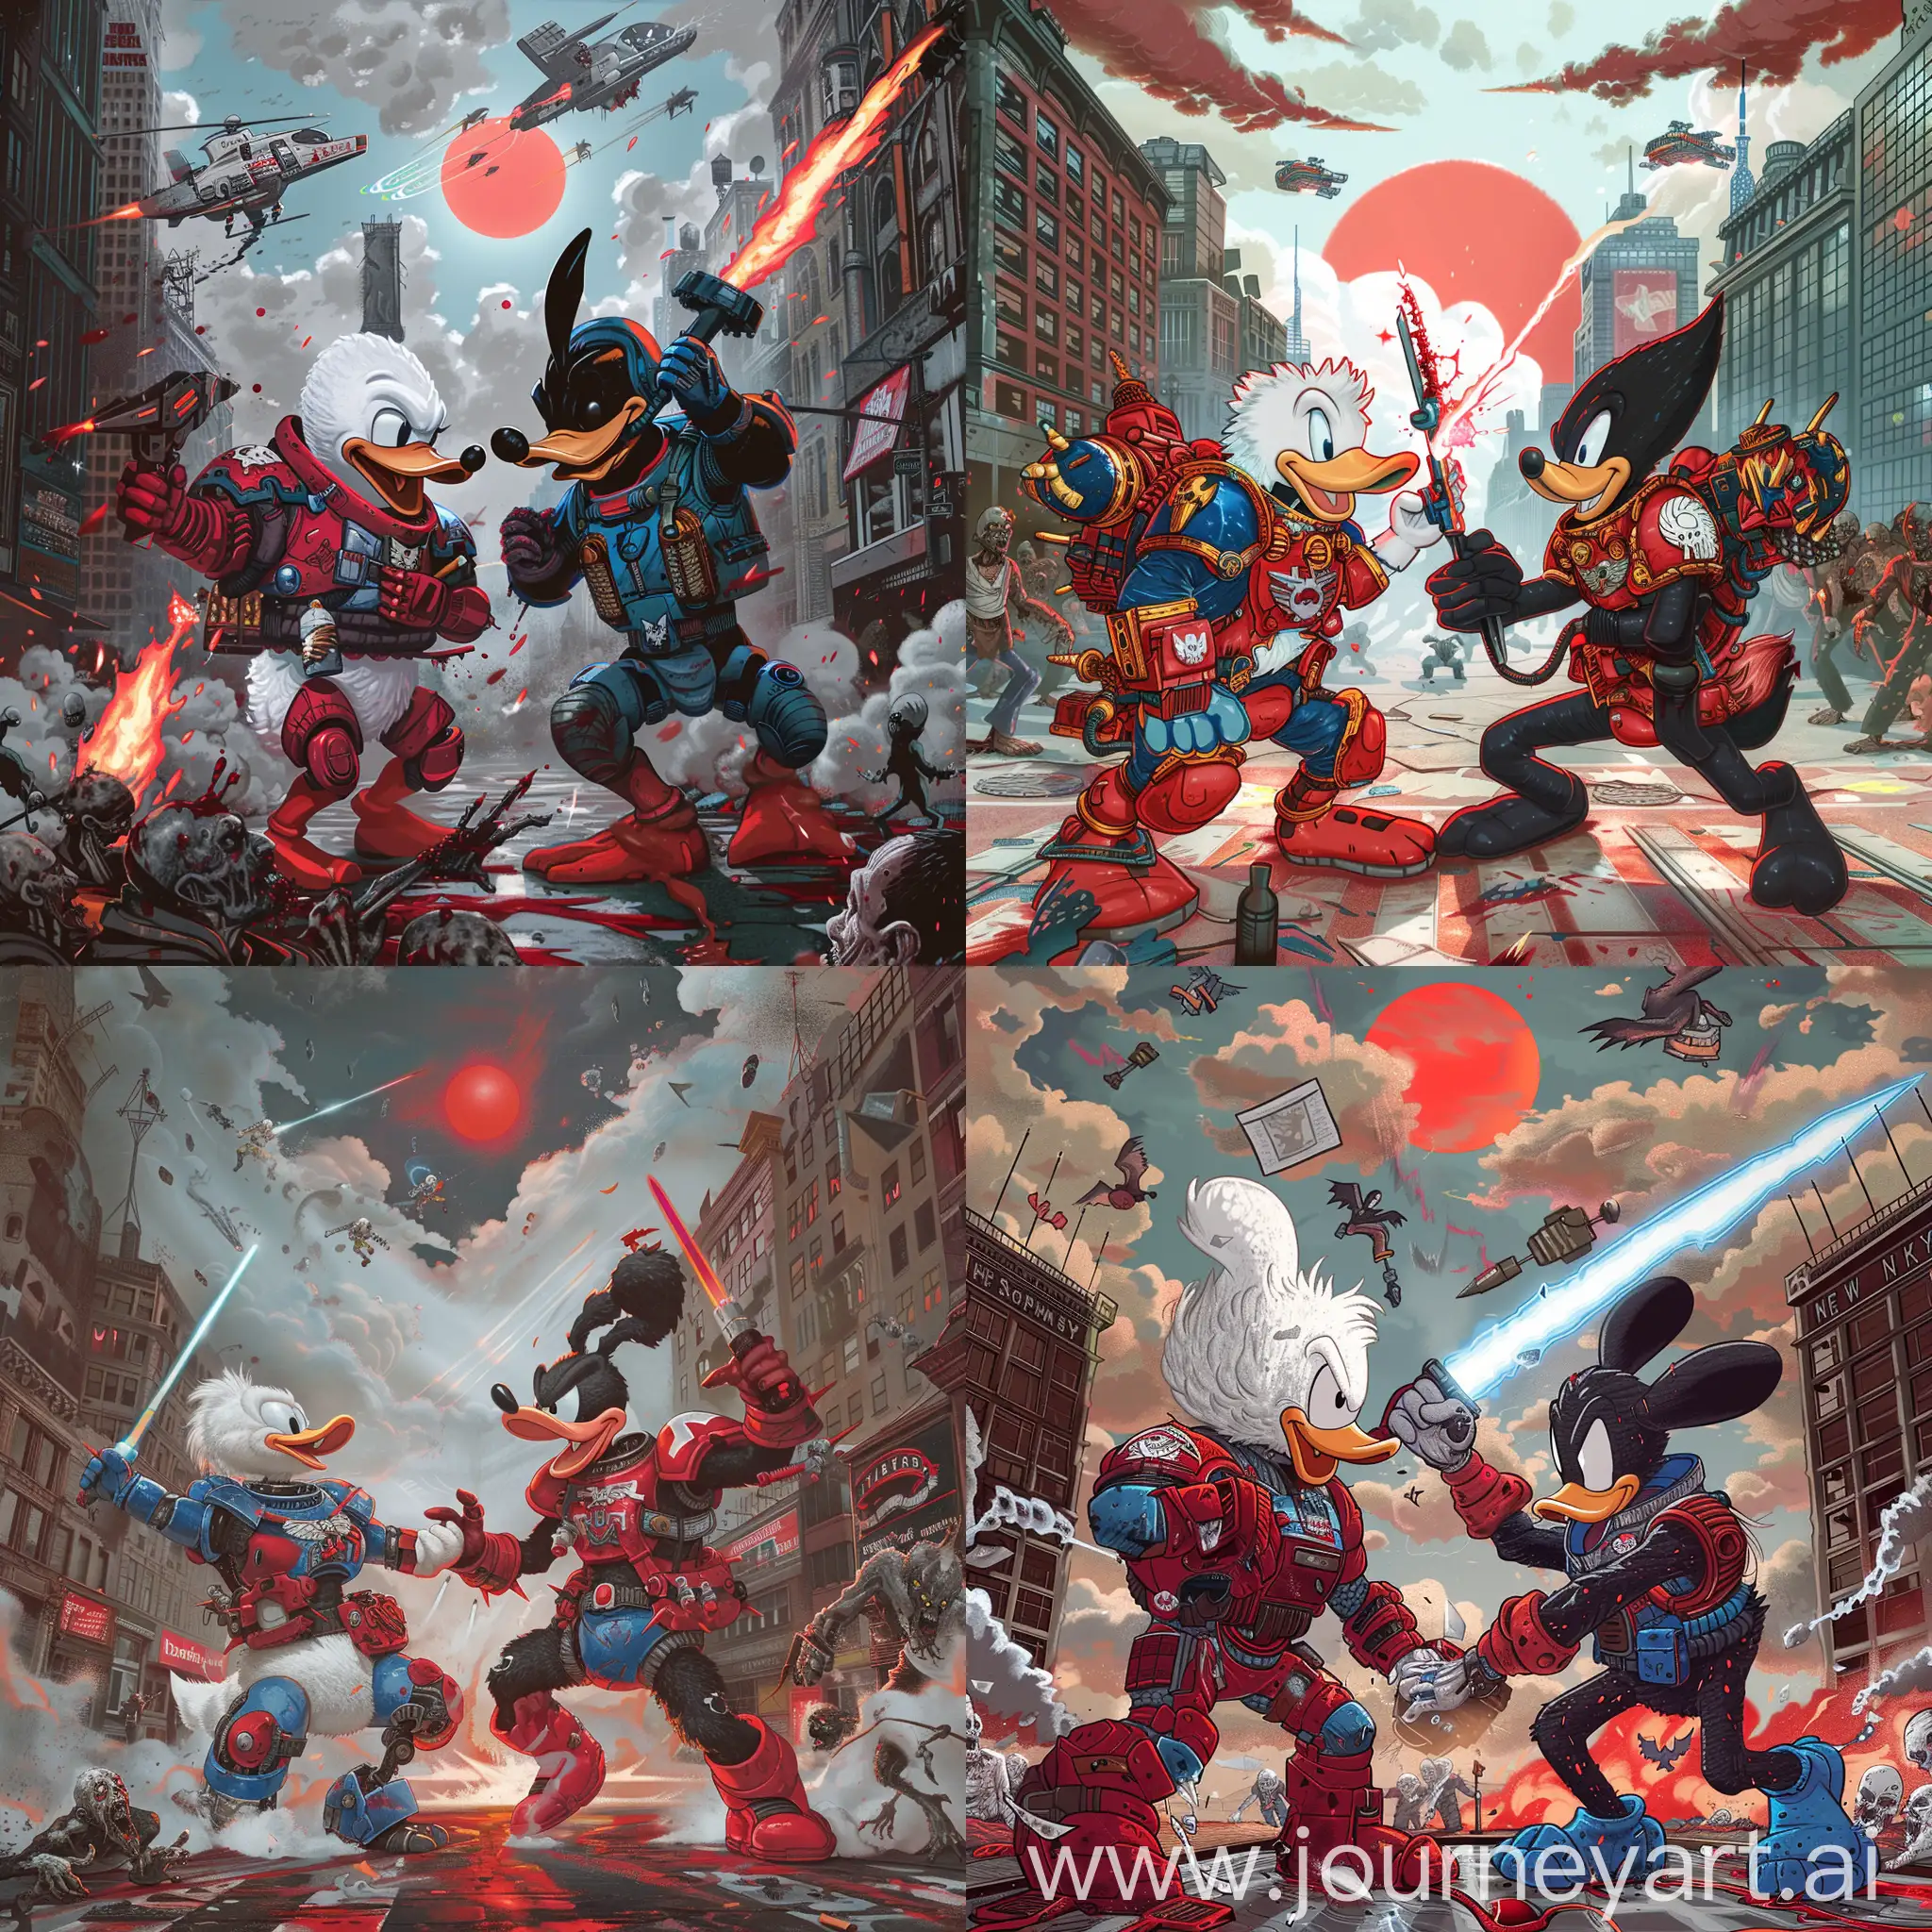 white Donald Duck and black Daffy Duck are both in red and blue color space marine armor, they are fighting against each other with their laser blades, before the Cyper Punk New York Manhattan Sqaure under Zombies invasion, cloudy sky and red sun